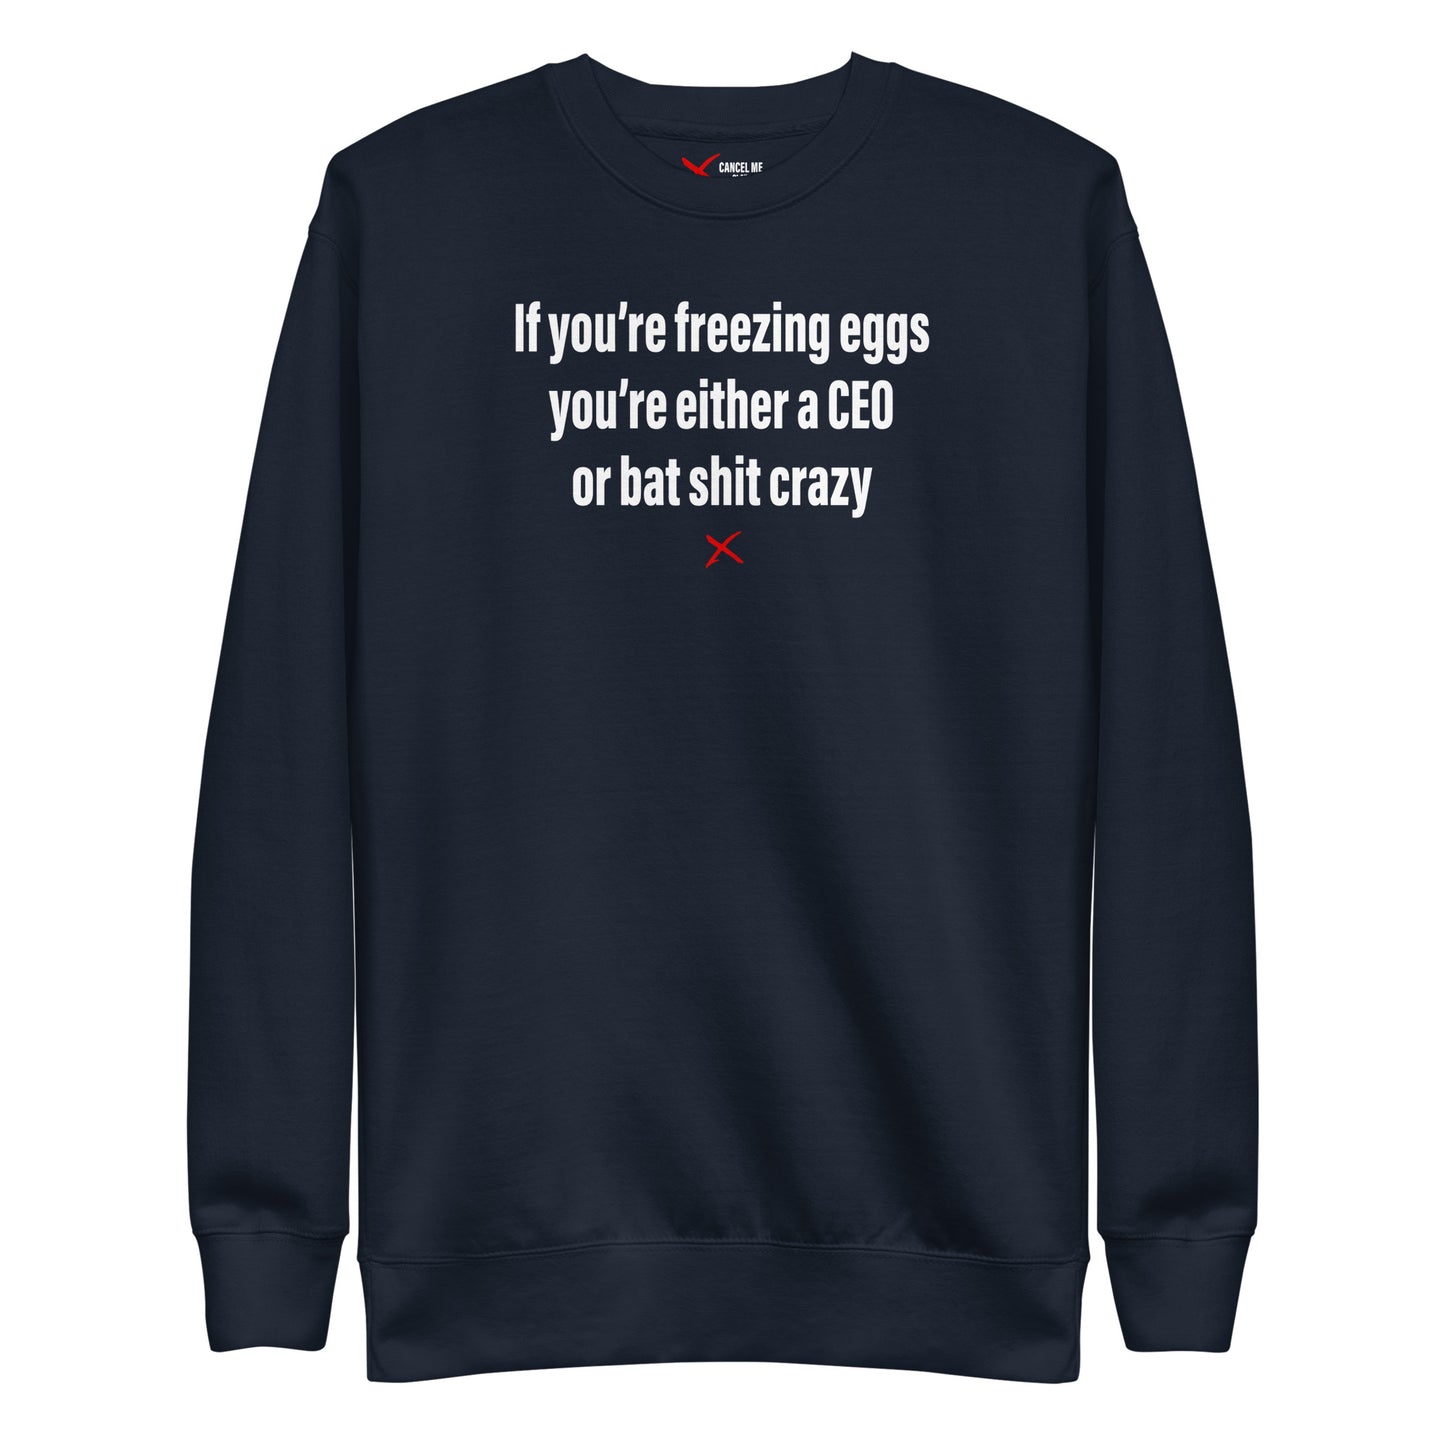 If you're freezing eggs you're either a CEO or bat shit crazy - Sweatshirt